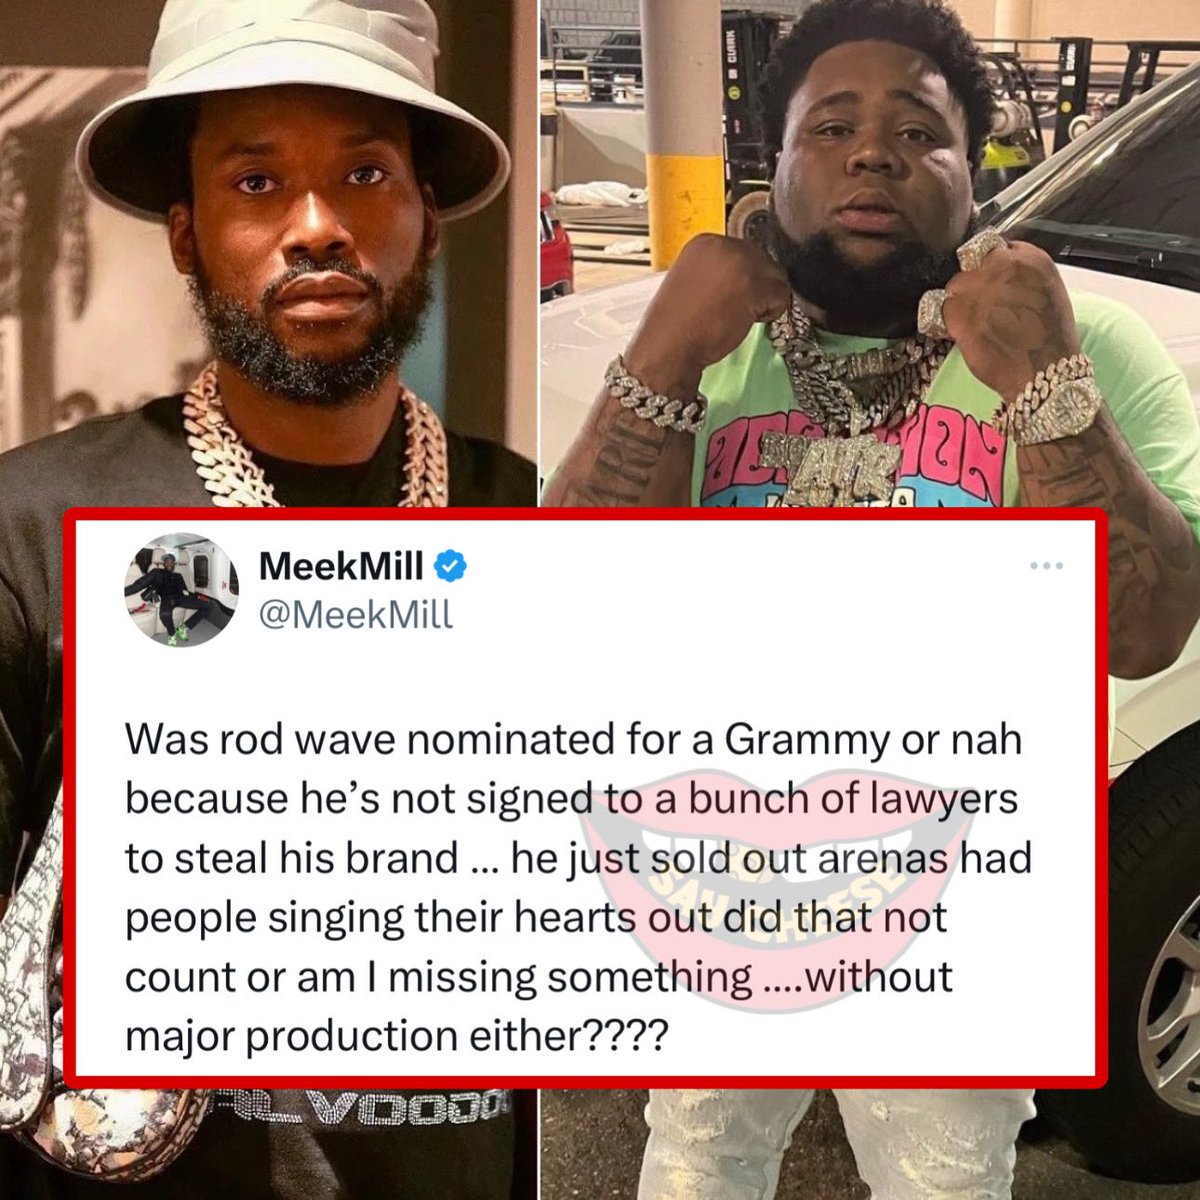 Meek Mill is curious as to why Rod Wave was not nominated for a Grammy: 

“He just sold out arenas had people singing their hearts out did that not count?”